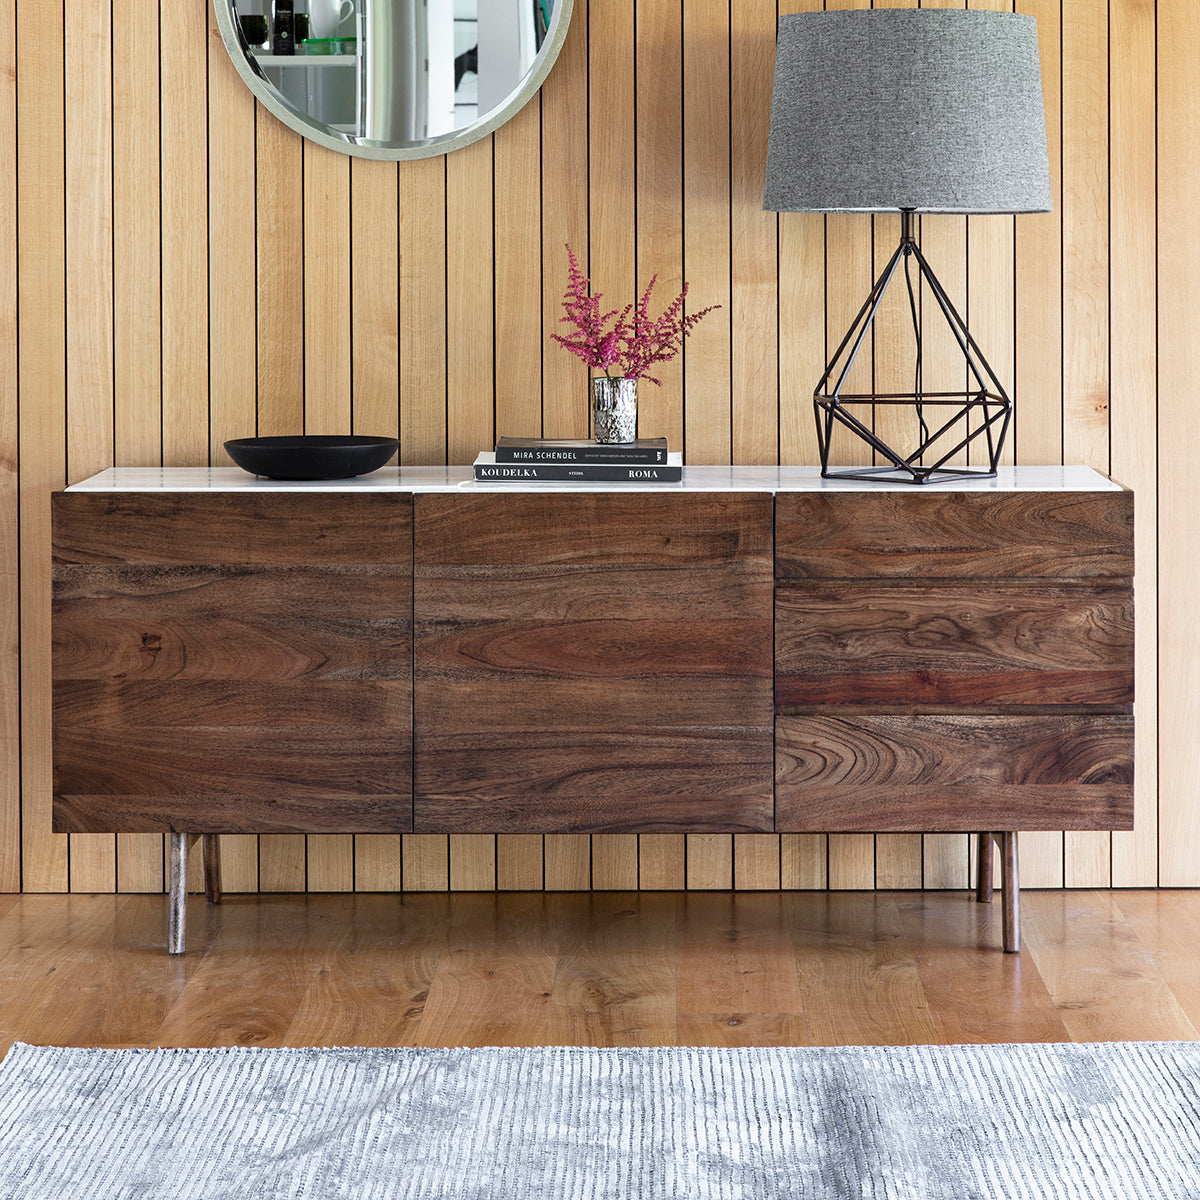 An Avonwick Sideboard 1650x450x700mm in a room with wood paneling, showcasing home furniture for interior decor.